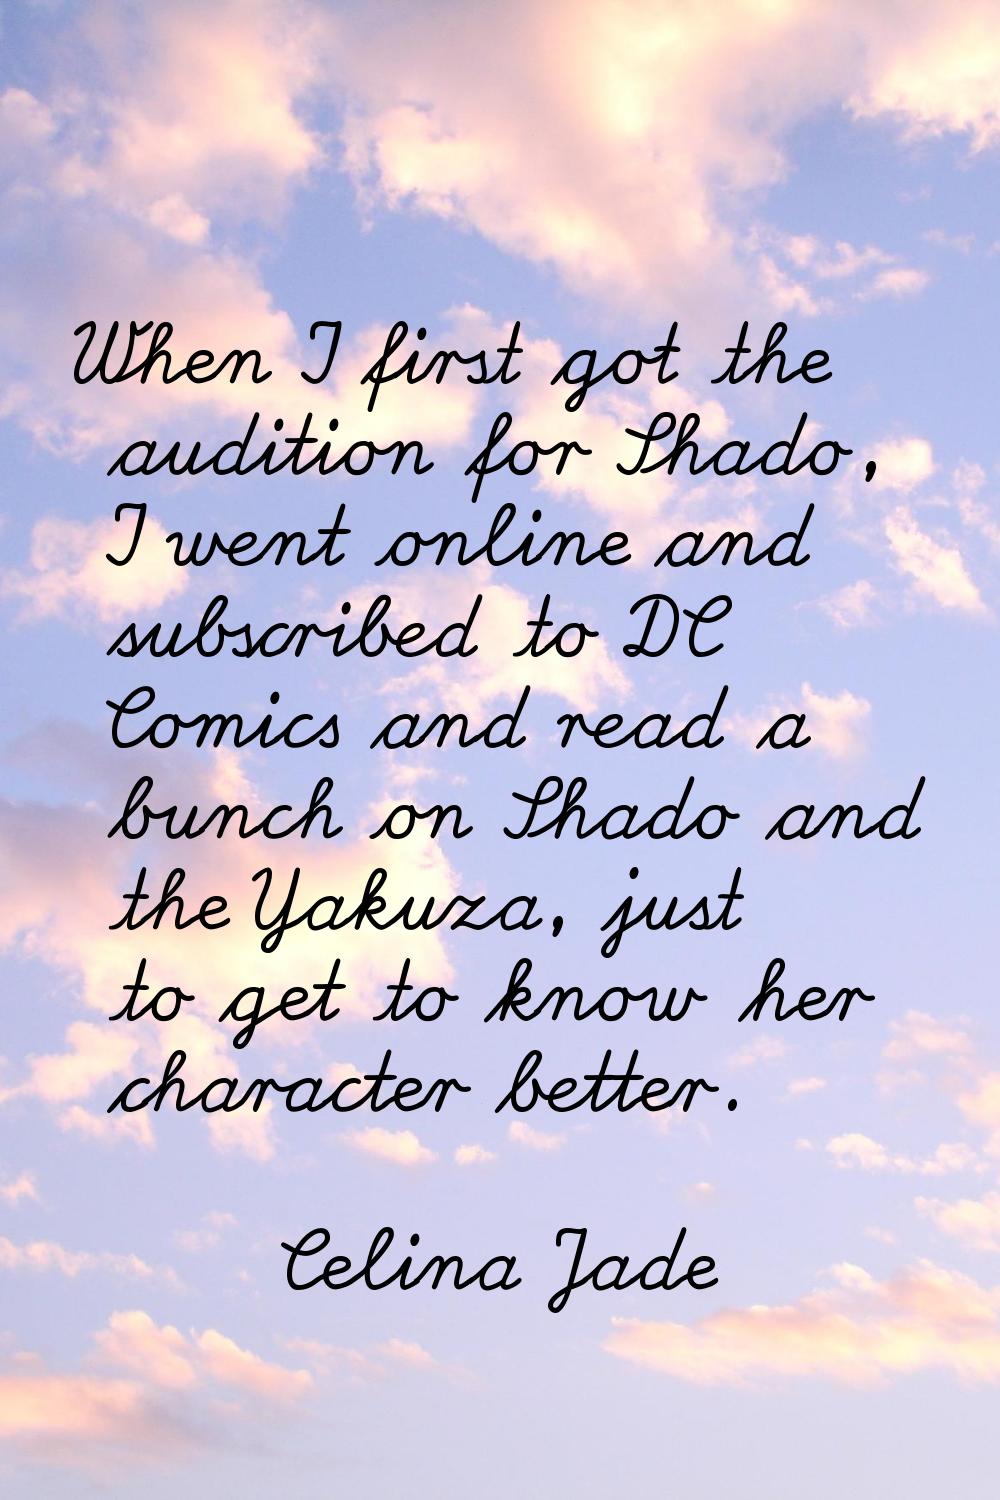 When I first got the audition for Shado, I went online and subscribed to DC Comics and read a bunch